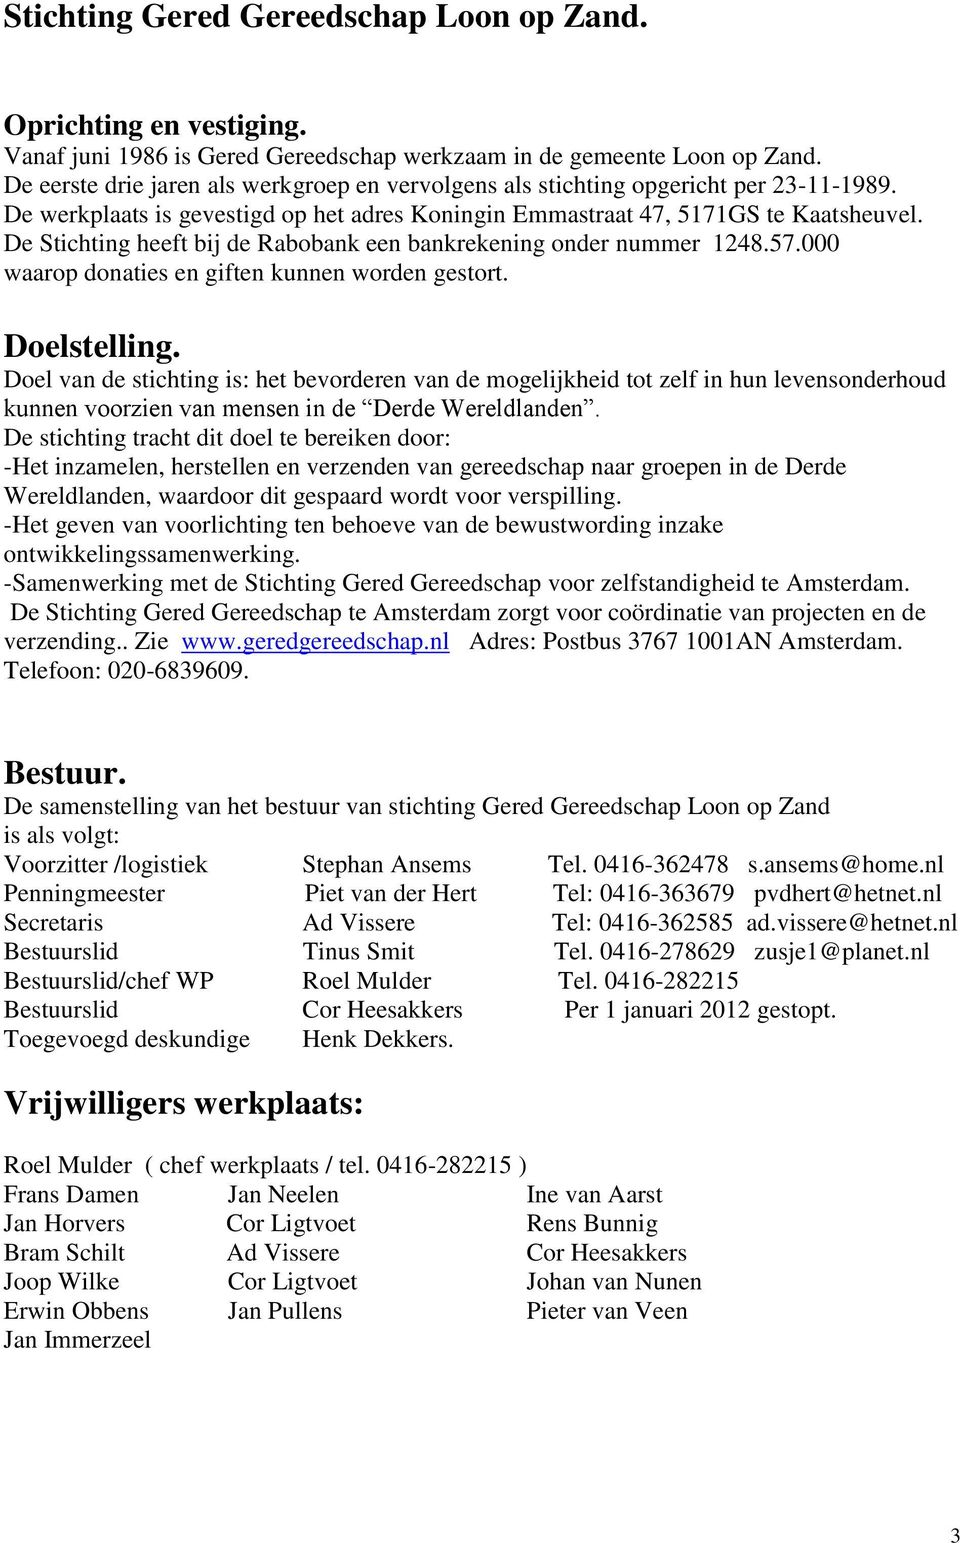 Stichting Gered Gereedschap Loon op Zand - PDF Free Download